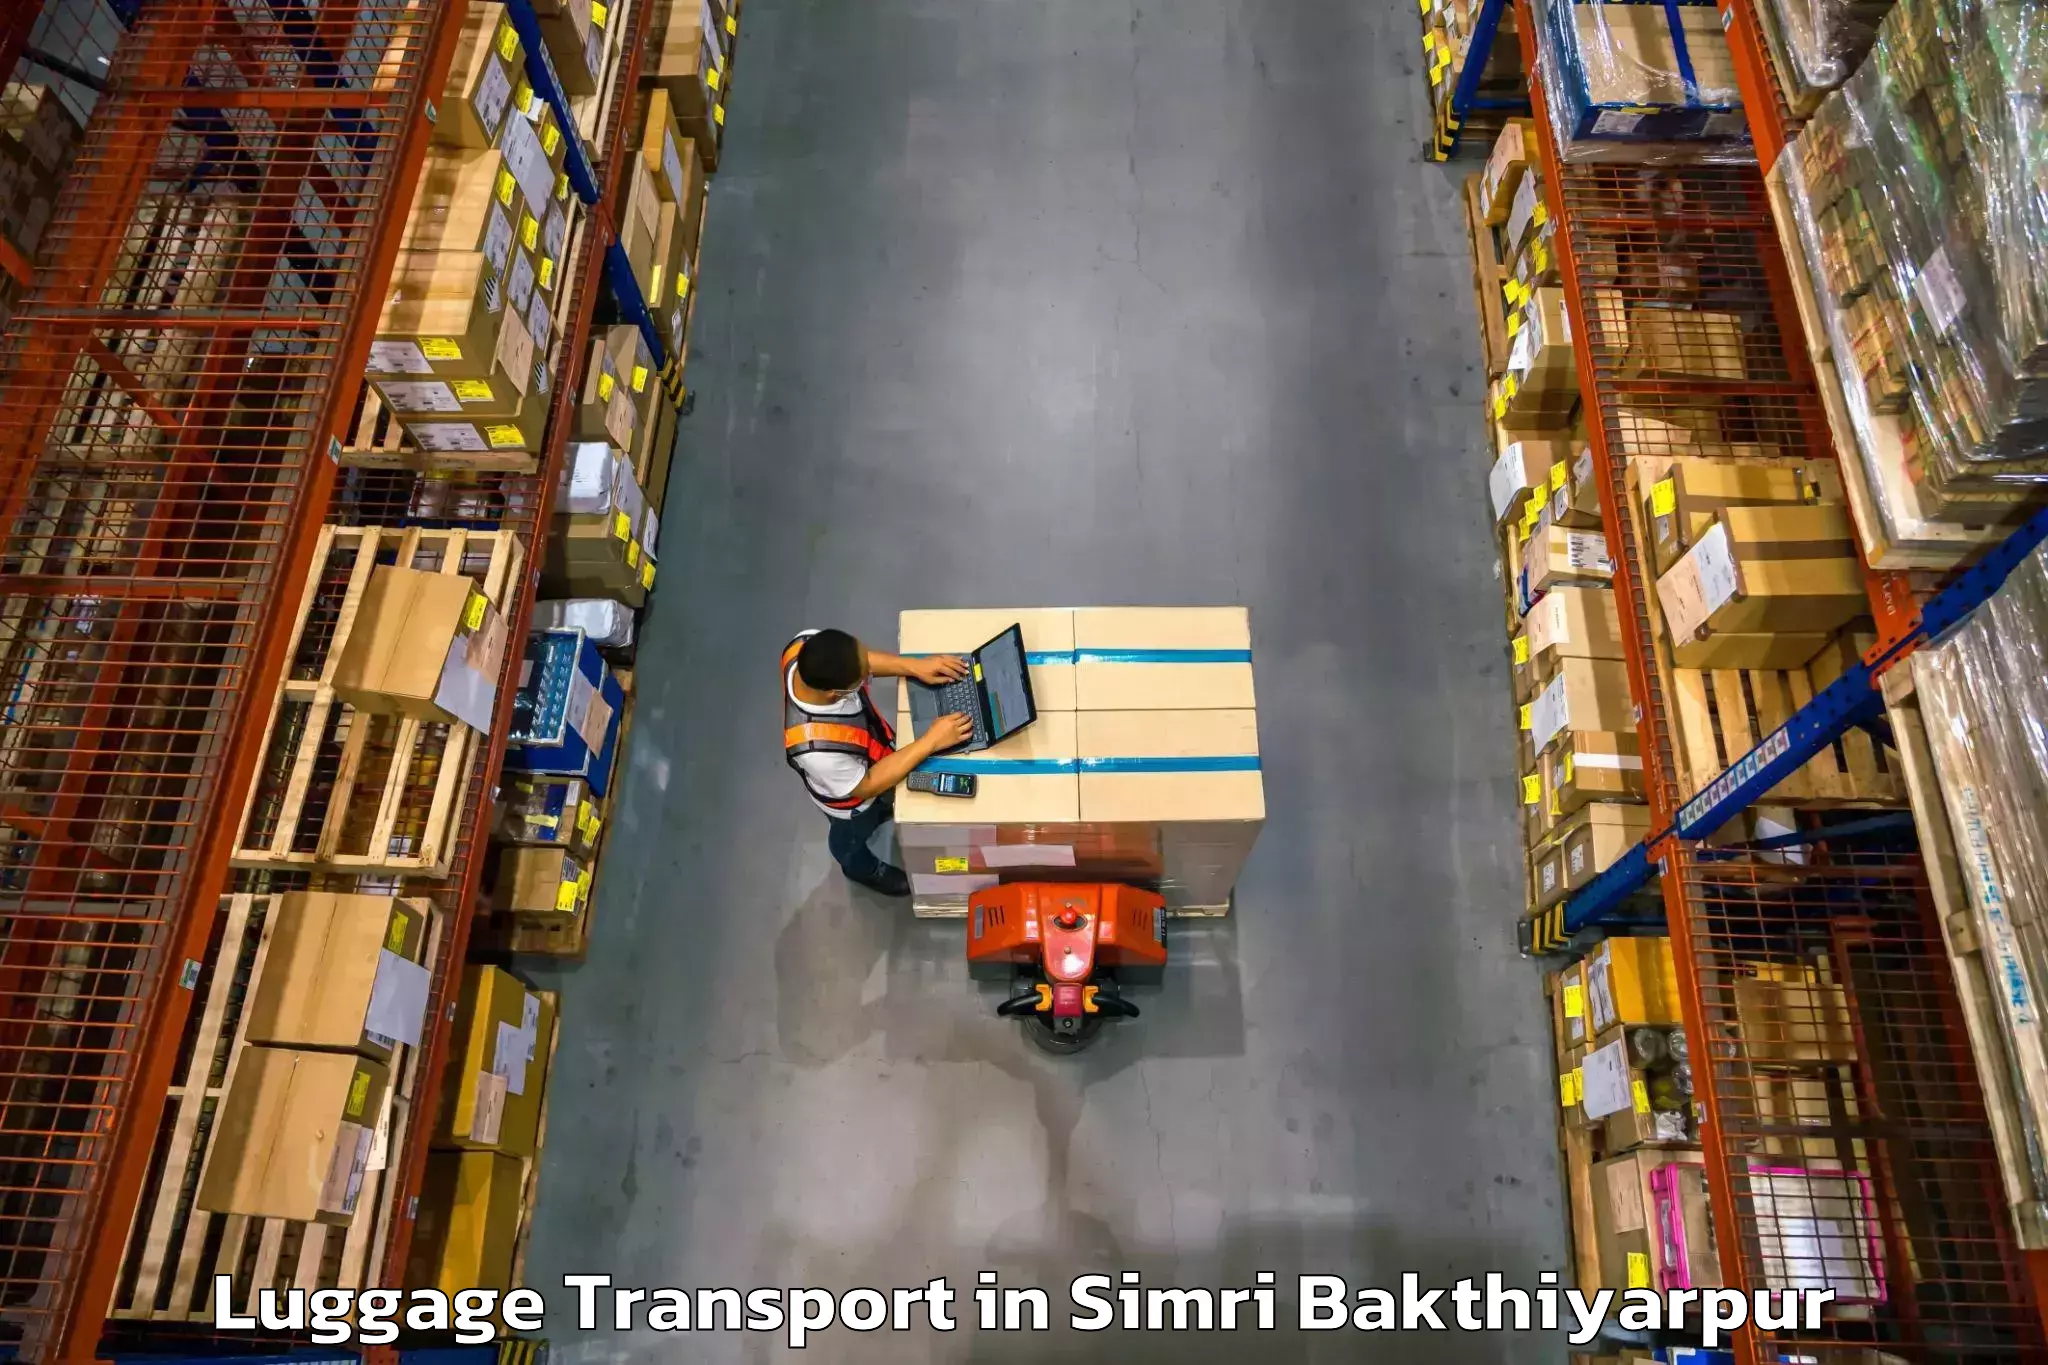 Luggage storage and delivery in Simri Bakthiyarpur